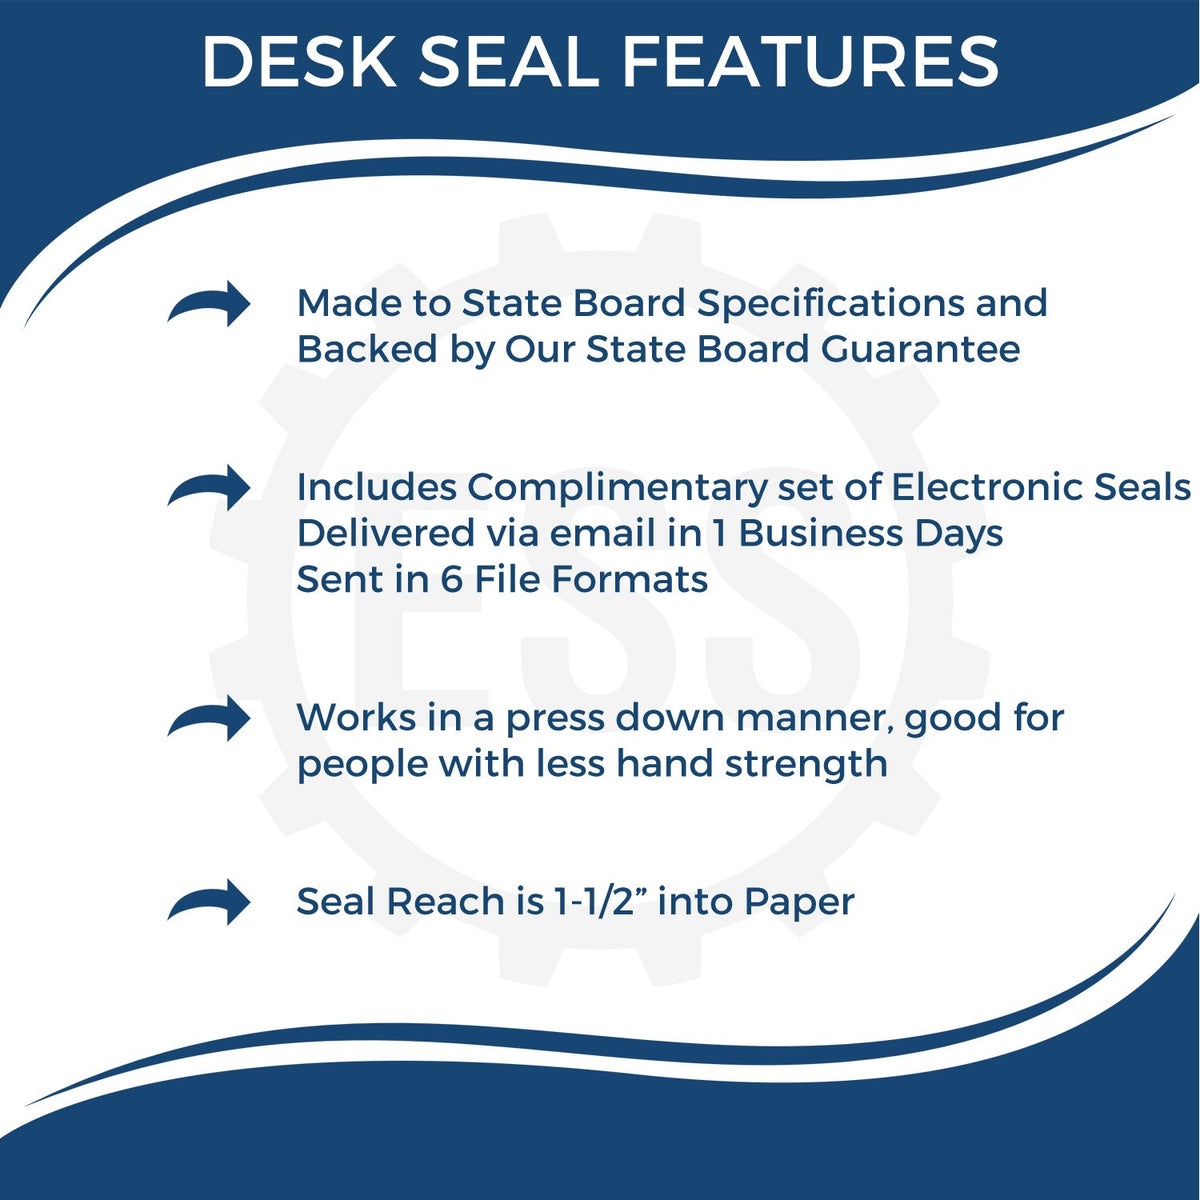 A picture of an infographic highlighting the selling points for the Iowa Geologist Desk Seal